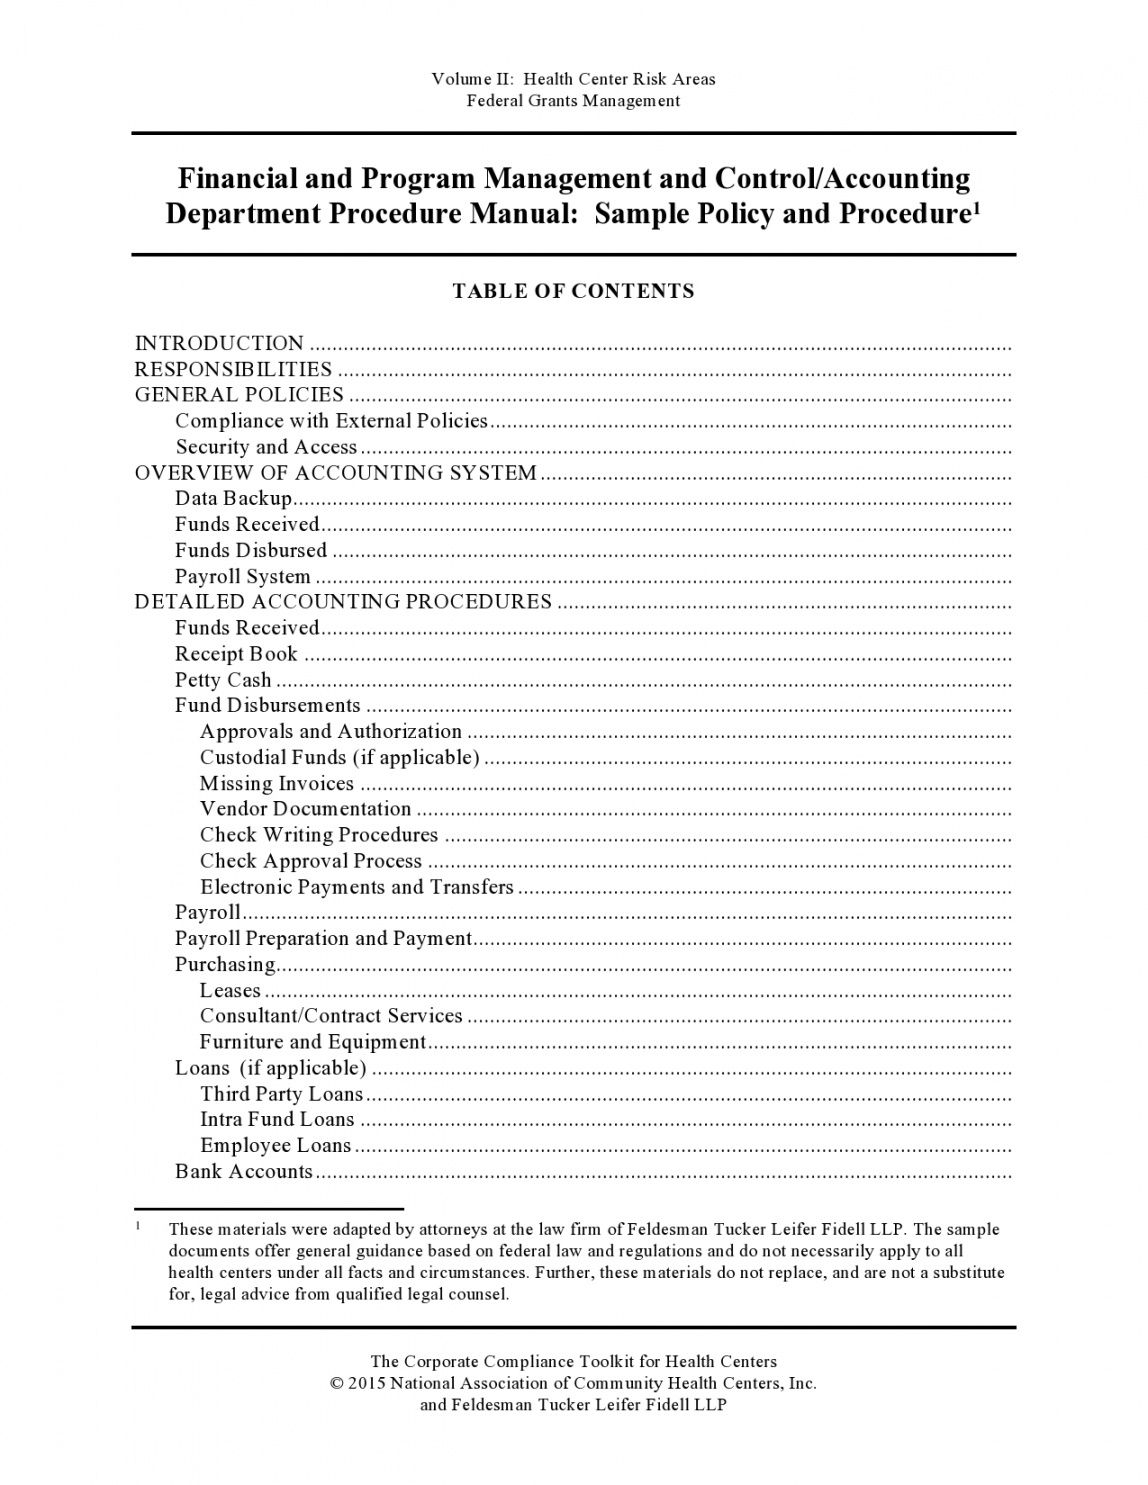 printable 50 free policy and procedure templates &amp; manuals property management policies and procedures template word